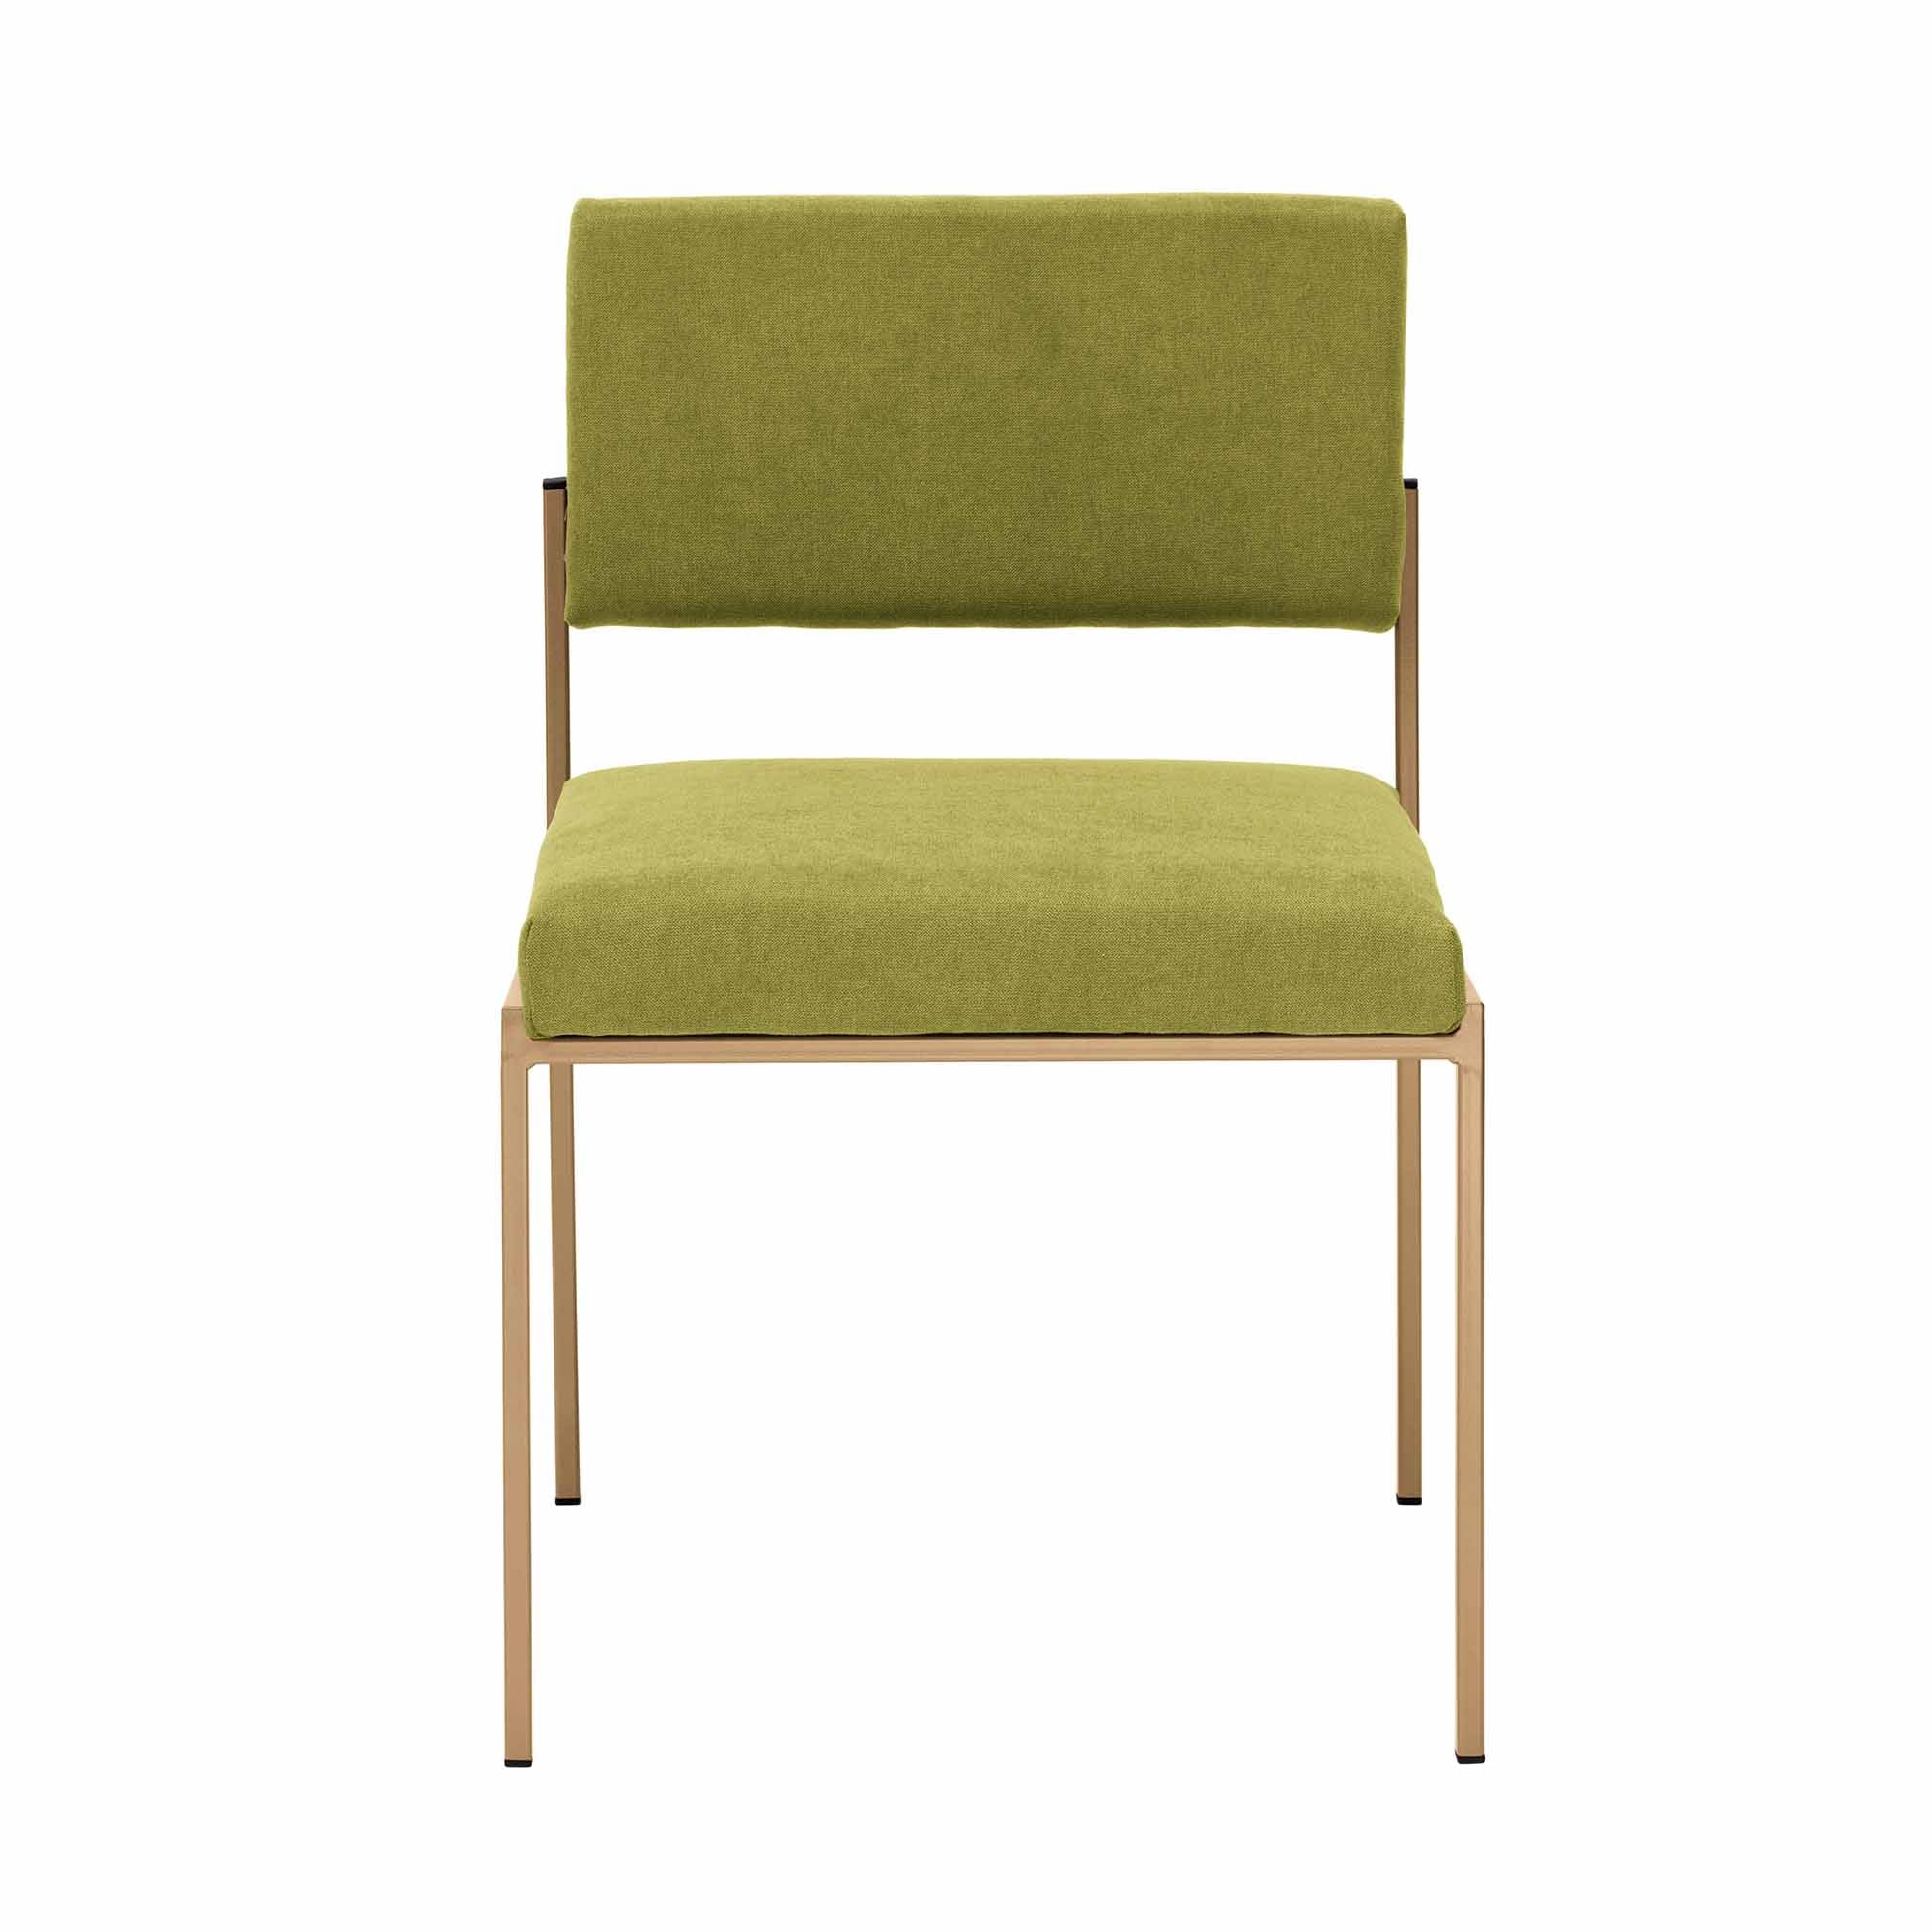  Chair, Powder-Coated Steel Frame, front view green fabric, yellow frame